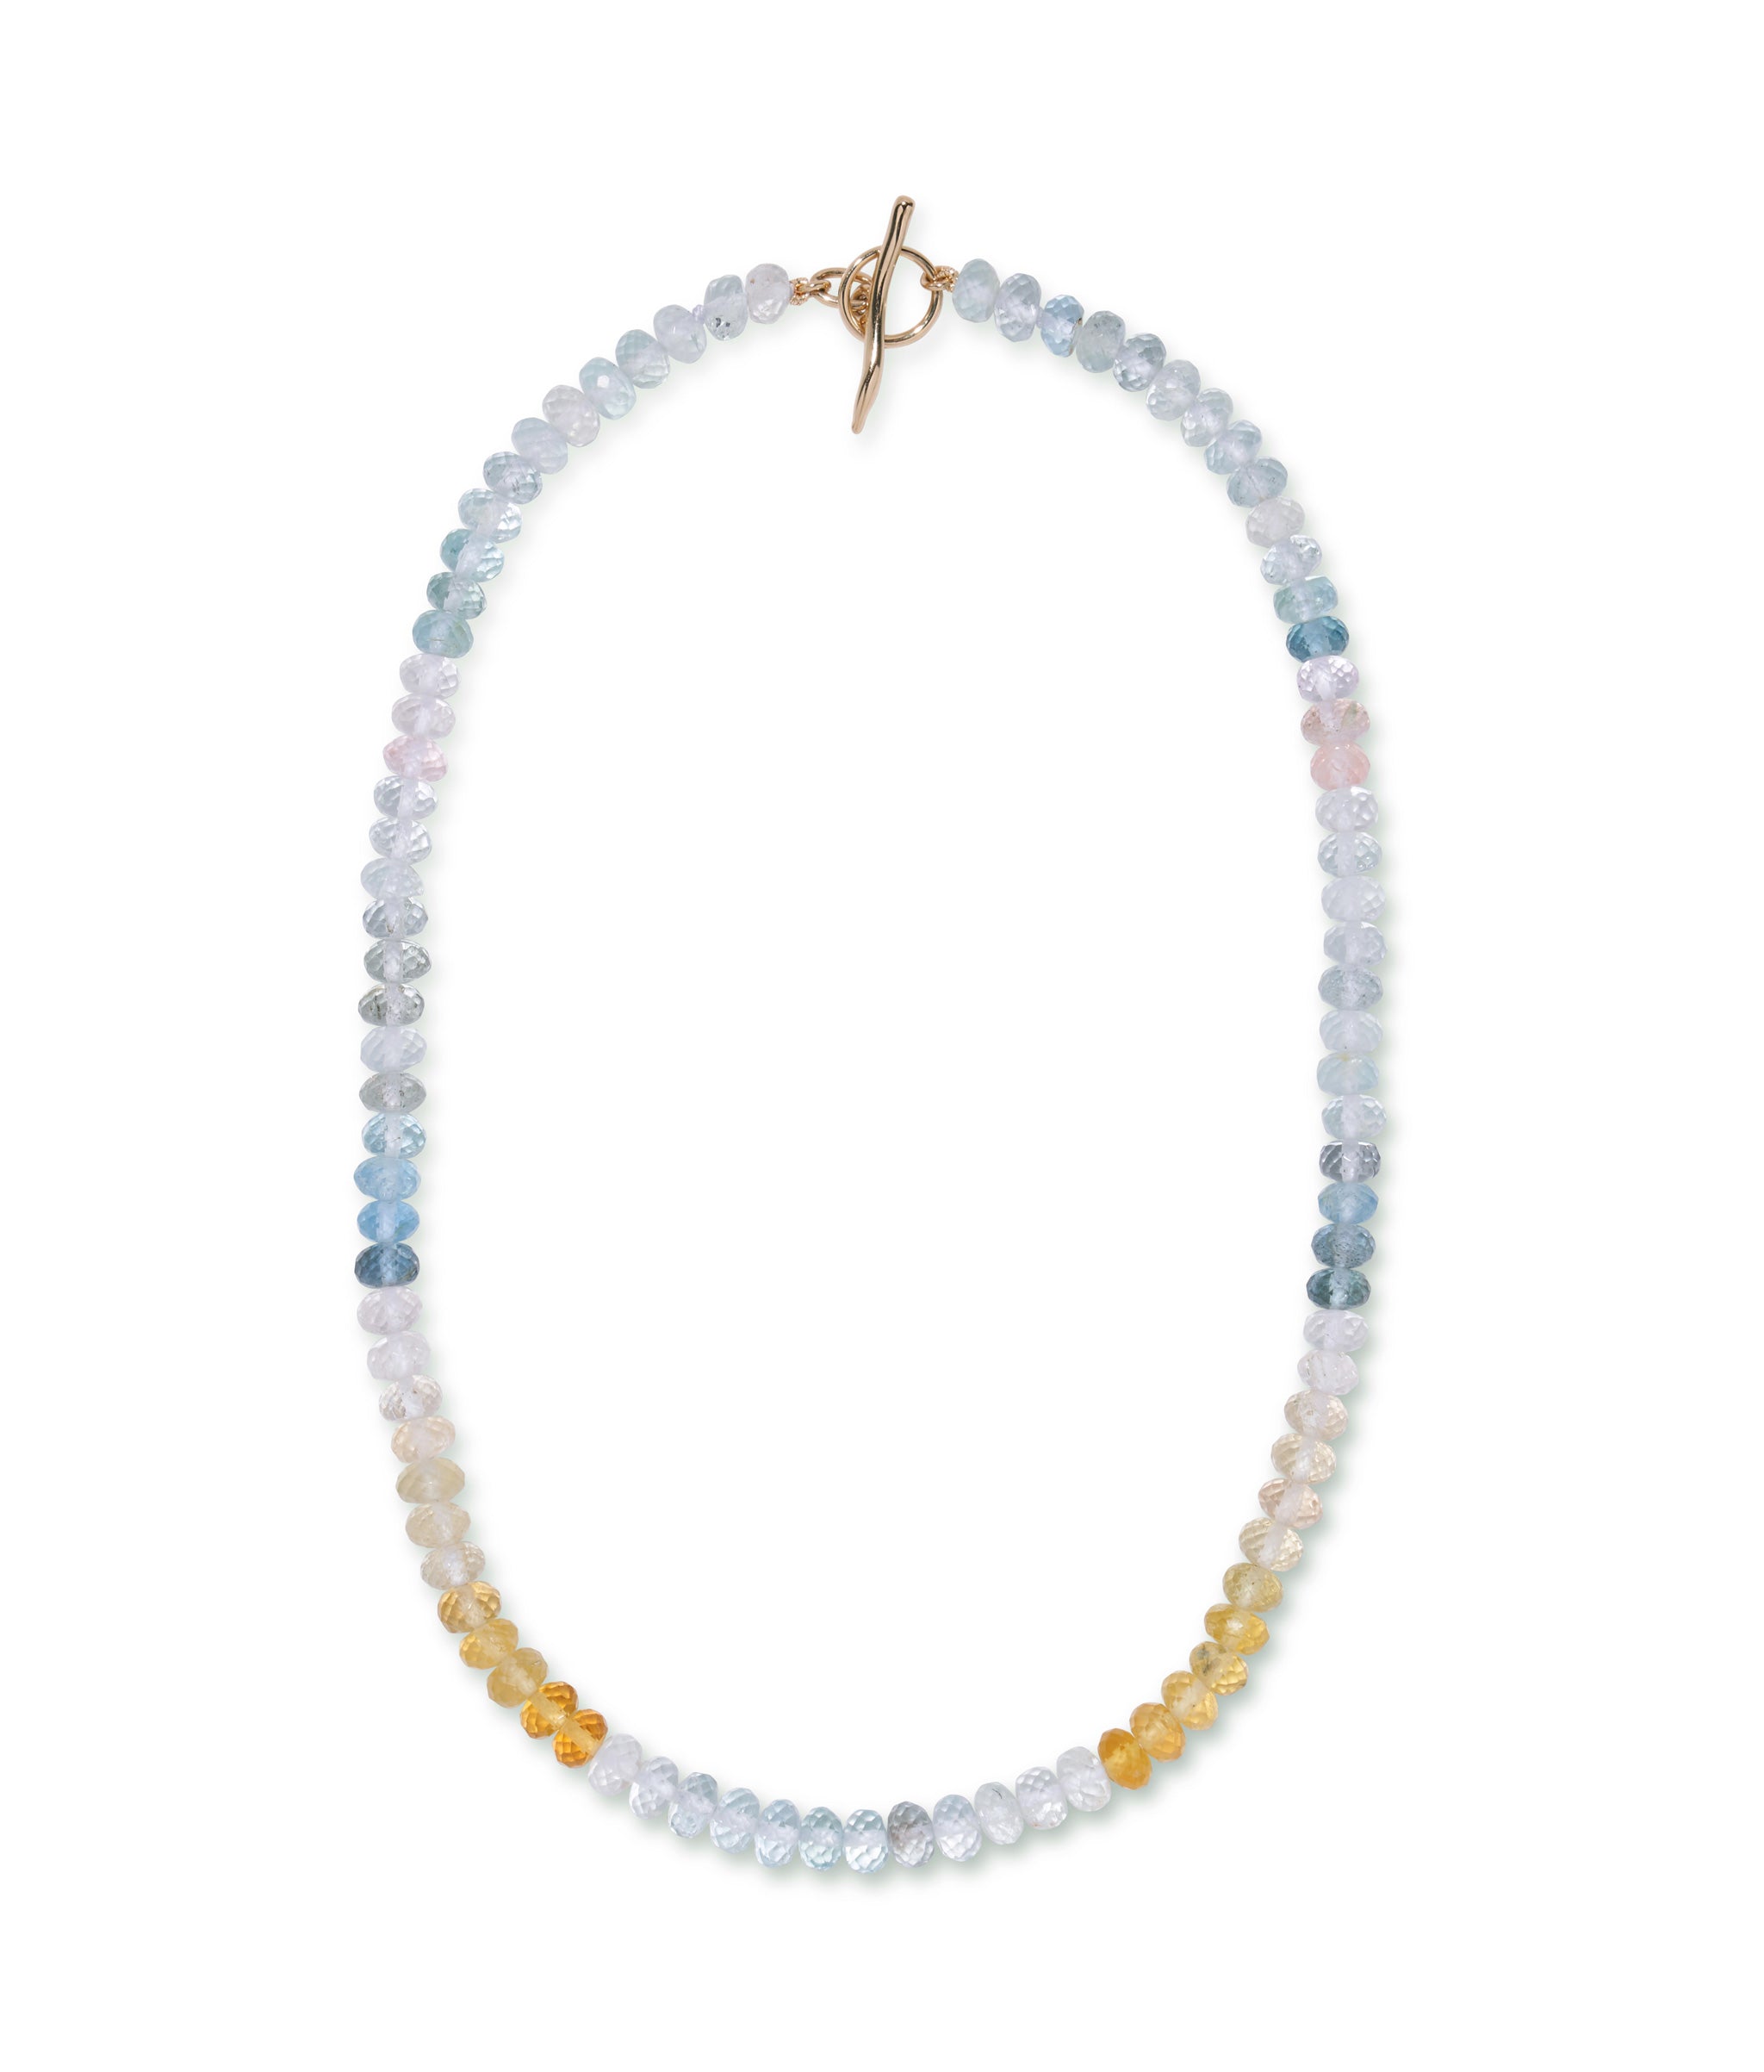 Rainbow Aquamarine, Morganite & 14k Gold Necklace. With faceted shaded rondelle beads and 14k gold toggle closure.